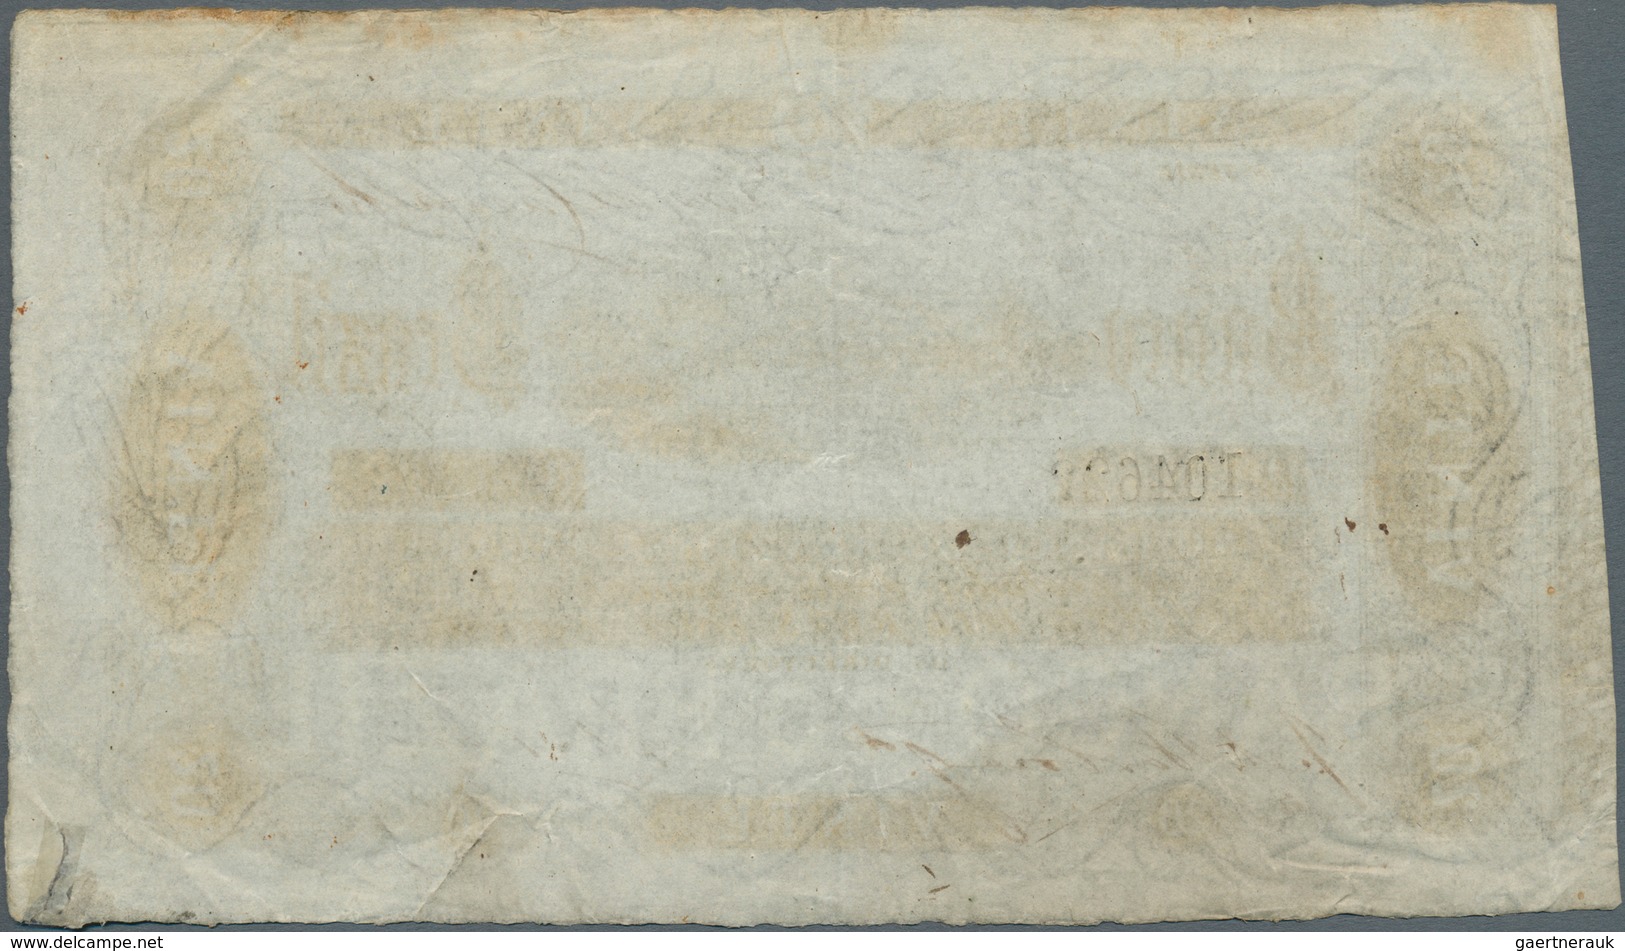 01156 Brazil / Brasilien: 20 Mil Reis ND(1856) P. S246, Creases In Paper, Tear At Lower Right Fixed With S - Brasil